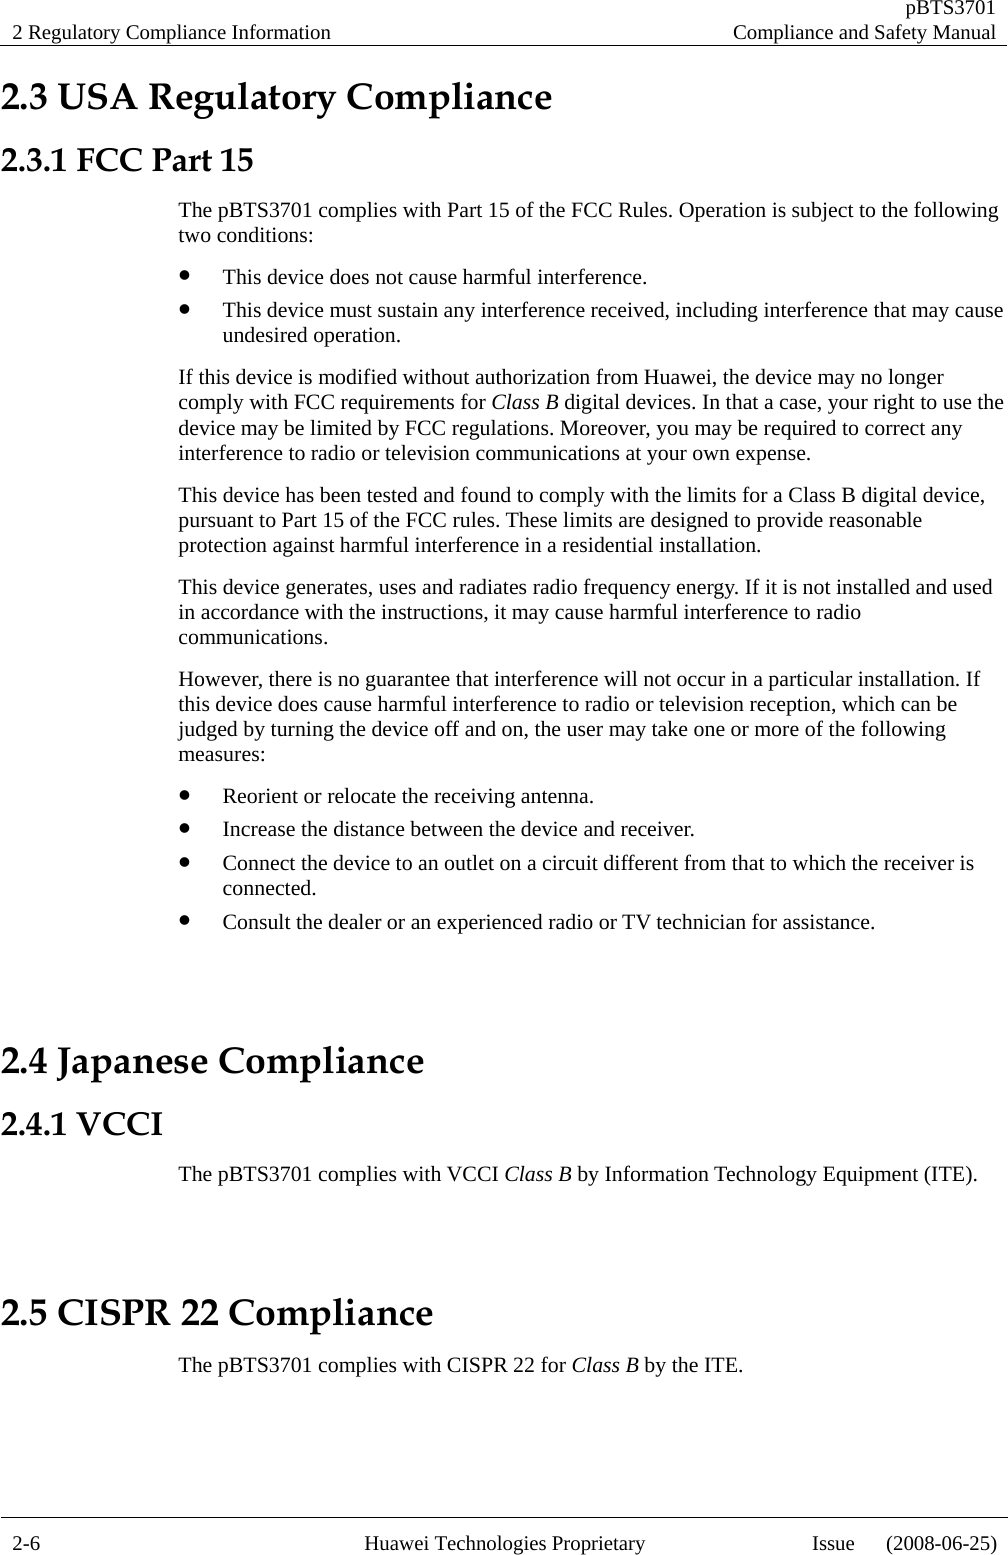 2 Regulatory Compliance Information   pBTS3701Compliance and Safety Manual 2-6  Huawei Technologies Proprietary  Issue      (2008-06-25)2.3 USA Regulatory Compliance 2.3.1 FCC Part 15 The pBTS3701 complies with Part 15 of the FCC Rules. Operation is subject to the following two conditions: z This device does not cause harmful interference. z This device must sustain any interference received, including interference that may cause undesired operation. If this device is modified without authorization from Huawei, the device may no longer comply with FCC requirements for Class B digital devices. In that a case, your right to use the device may be limited by FCC regulations. Moreover, you may be required to correct any interference to radio or television communications at your own expense. This device has been tested and found to comply with the limits for a Class B digital device, pursuant to Part 15 of the FCC rules. These limits are designed to provide reasonable protection against harmful interference in a residential installation. This device generates, uses and radiates radio frequency energy. If it is not installed and used in accordance with the instructions, it may cause harmful interference to radio communications. However, there is no guarantee that interference will not occur in a particular installation. If this device does cause harmful interference to radio or television reception, which can be judged by turning the device off and on, the user may take one or more of the following measures: z Reorient or relocate the receiving antenna. z Increase the distance between the device and receiver. z Connect the device to an outlet on a circuit different from that to which the receiver is connected. z Consult the dealer or an experienced radio or TV technician for assistance.  2.4 Japanese Compliance 2.4.1 VCCI The pBTS3701 complies with VCCI Class B by Information Technology Equipment (ITE).  2.5 CISPR 22 Compliance The pBTS3701 complies with CISPR 22 for Class B by the ITE.   